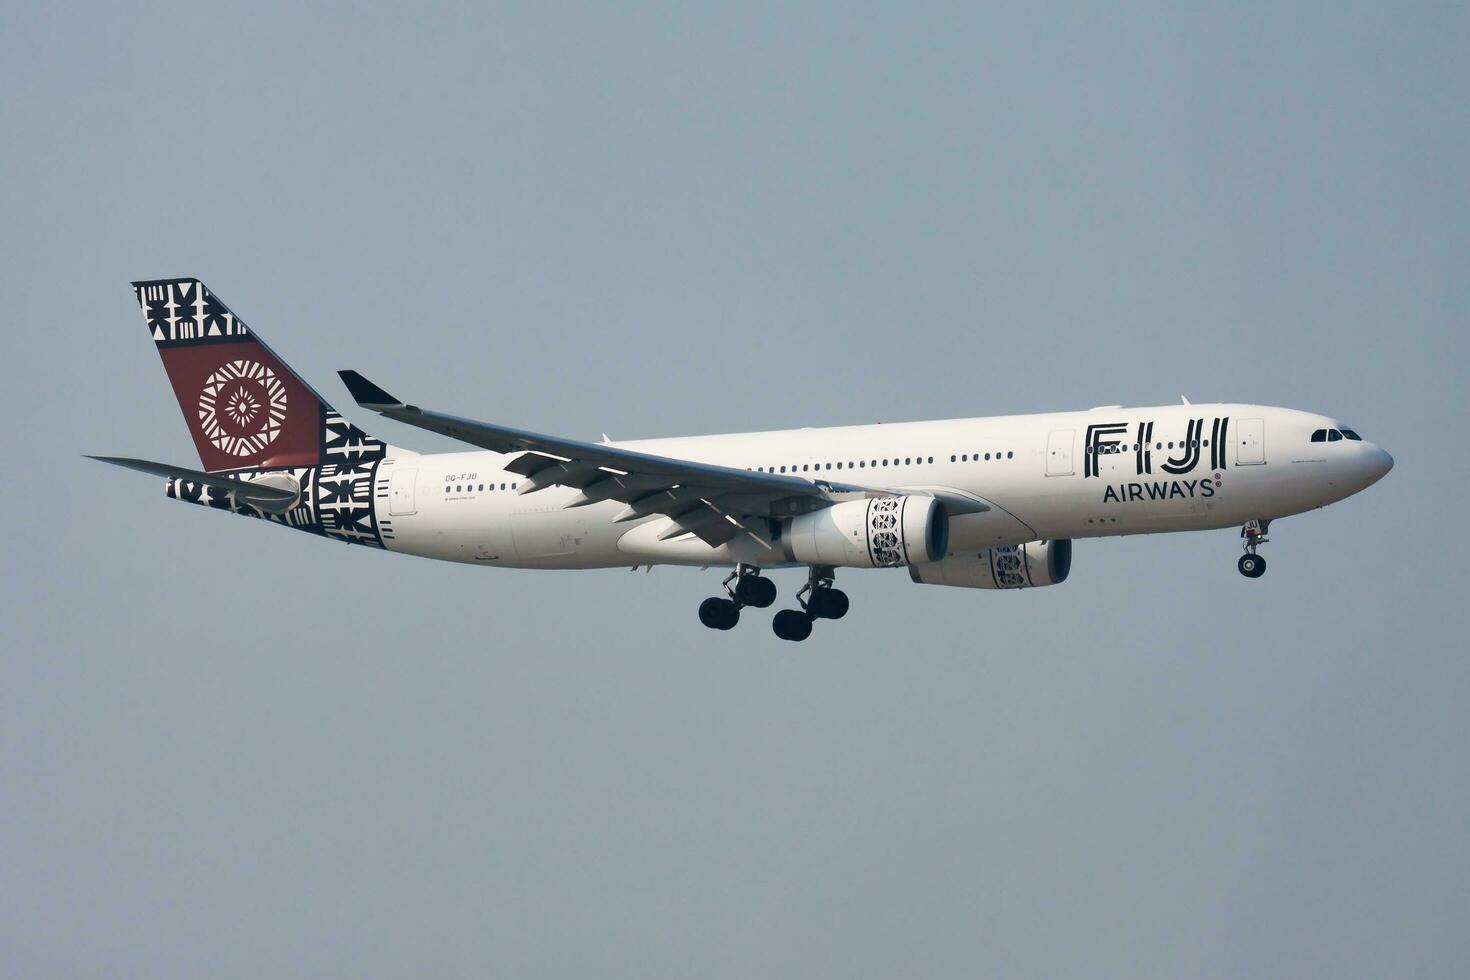 Fiji Airways passenger plane at airport. Schedule flight travel. Aviation and aircraft. Air transport. Global international transportation. Fly and flying. photo